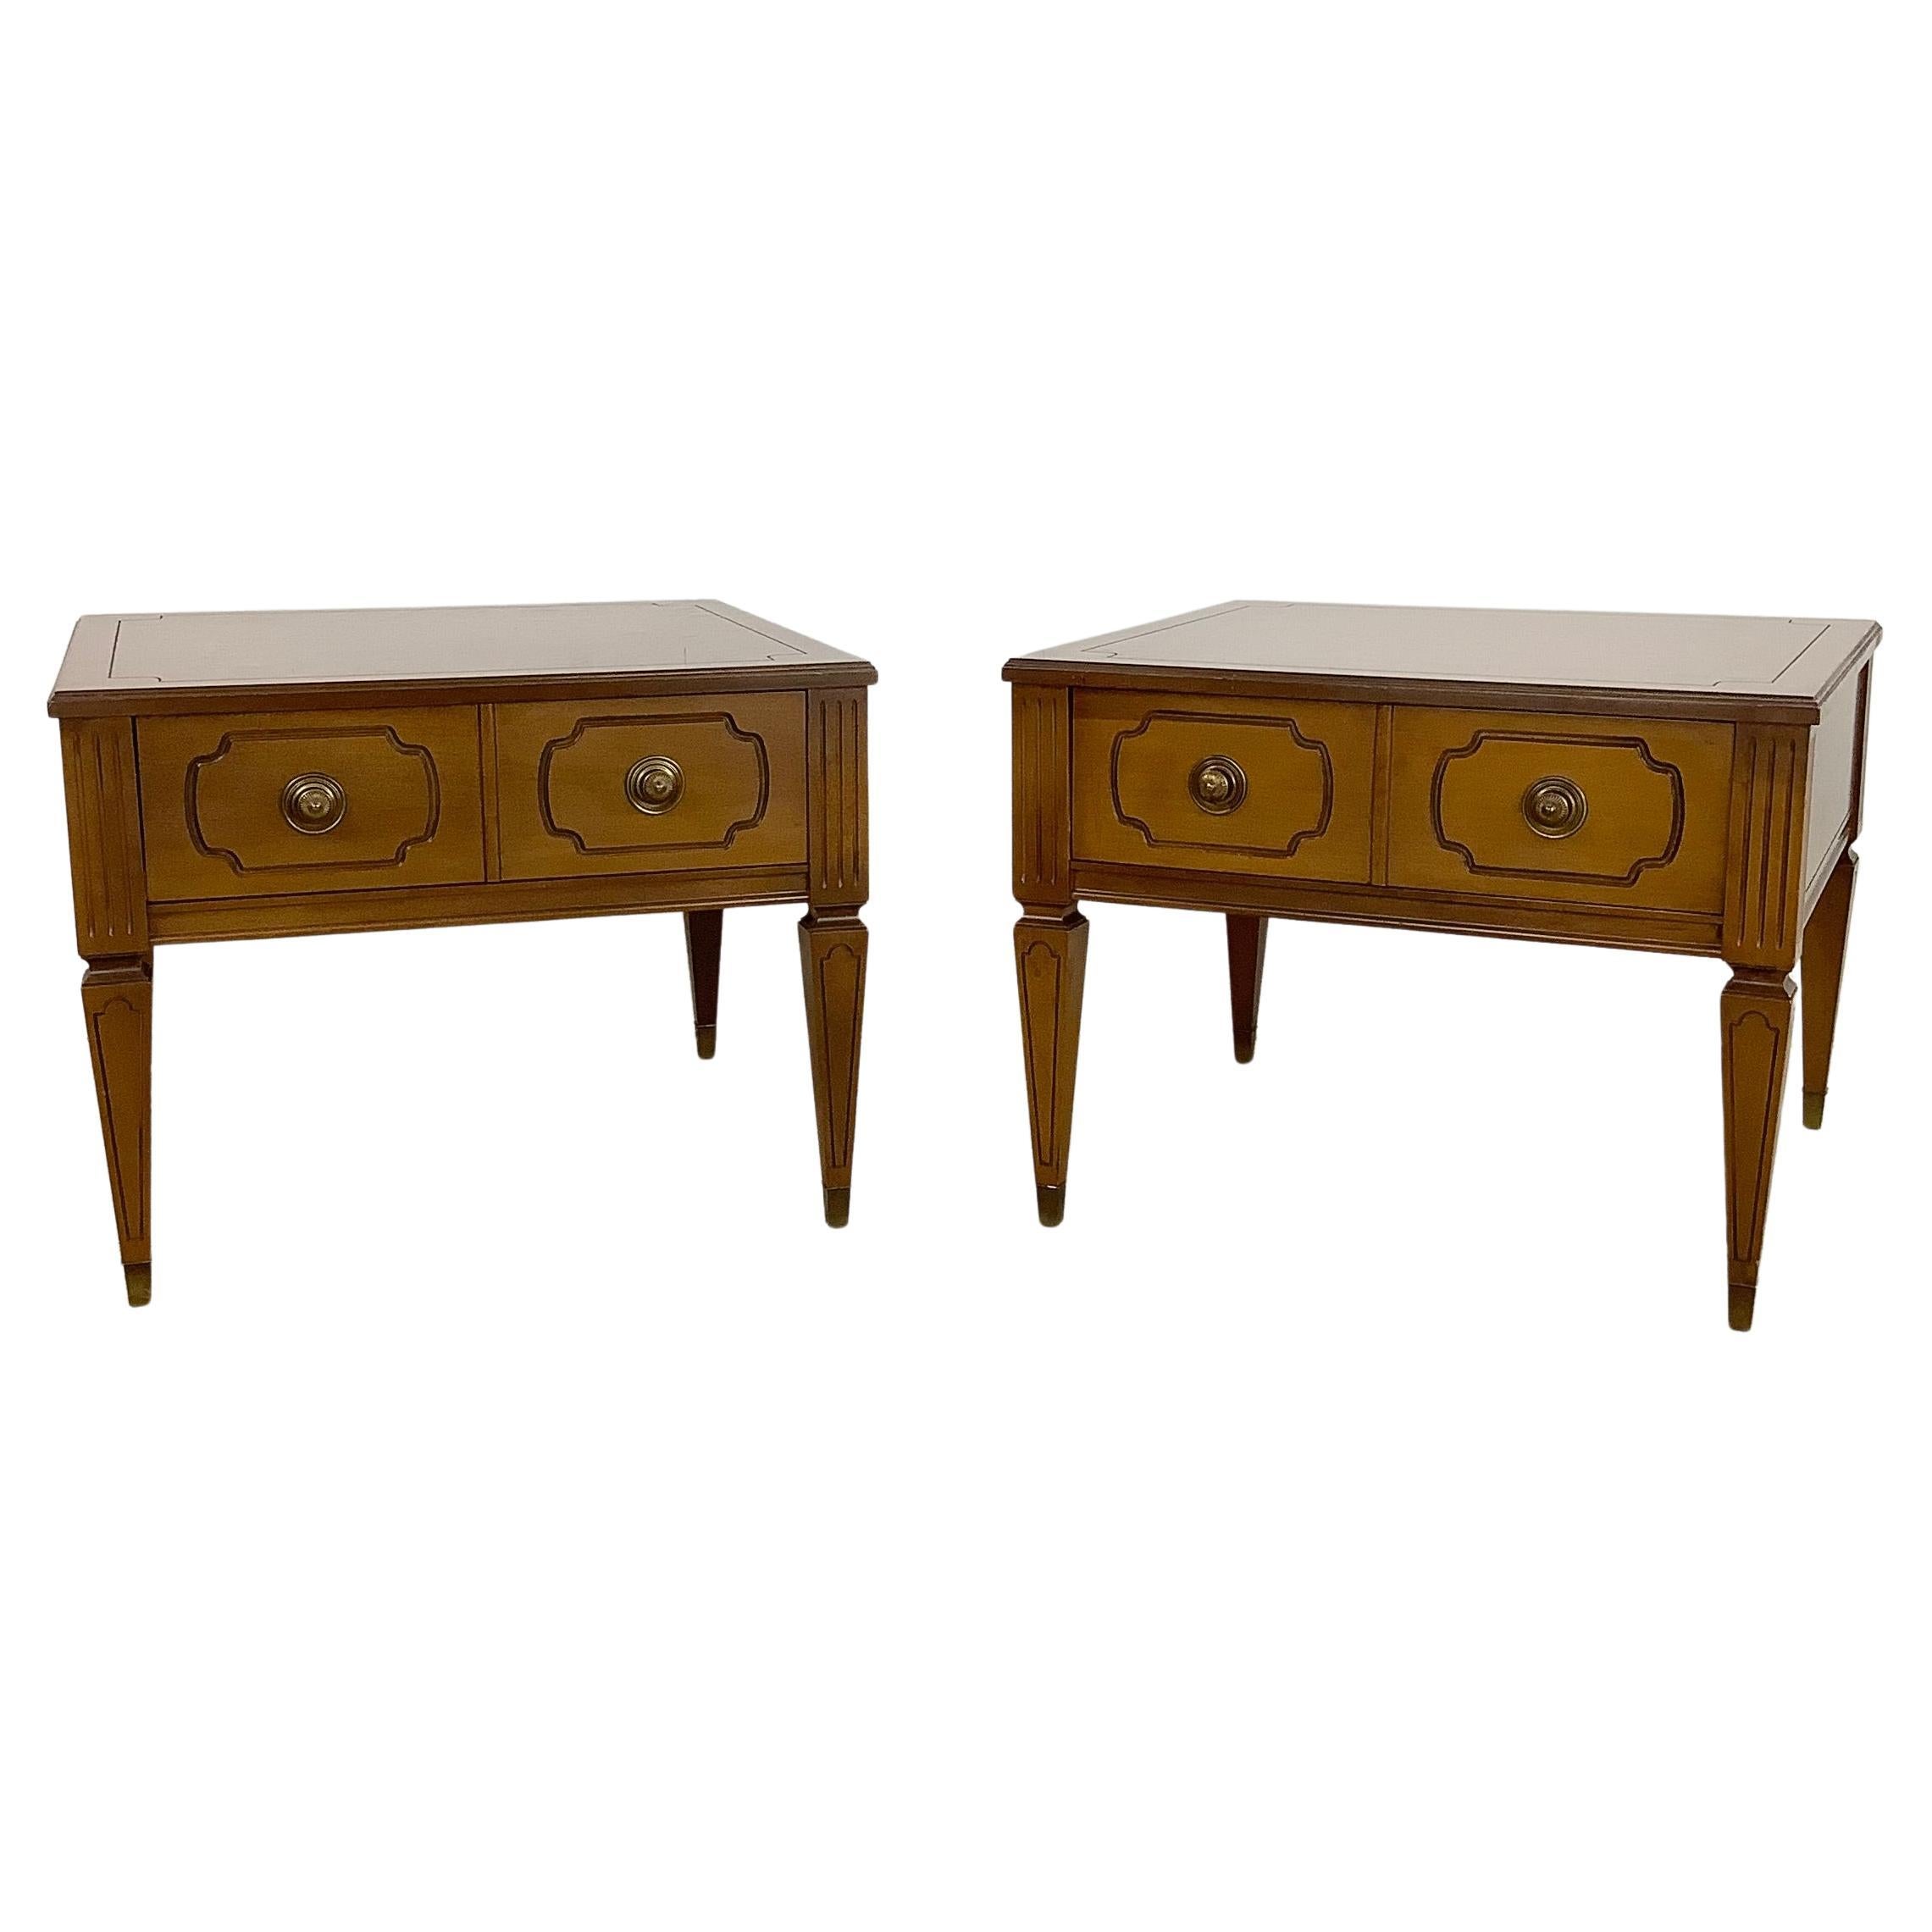 Vintage Square End Tables with Single Drawer by Mersman Furniture- Pair For Sale